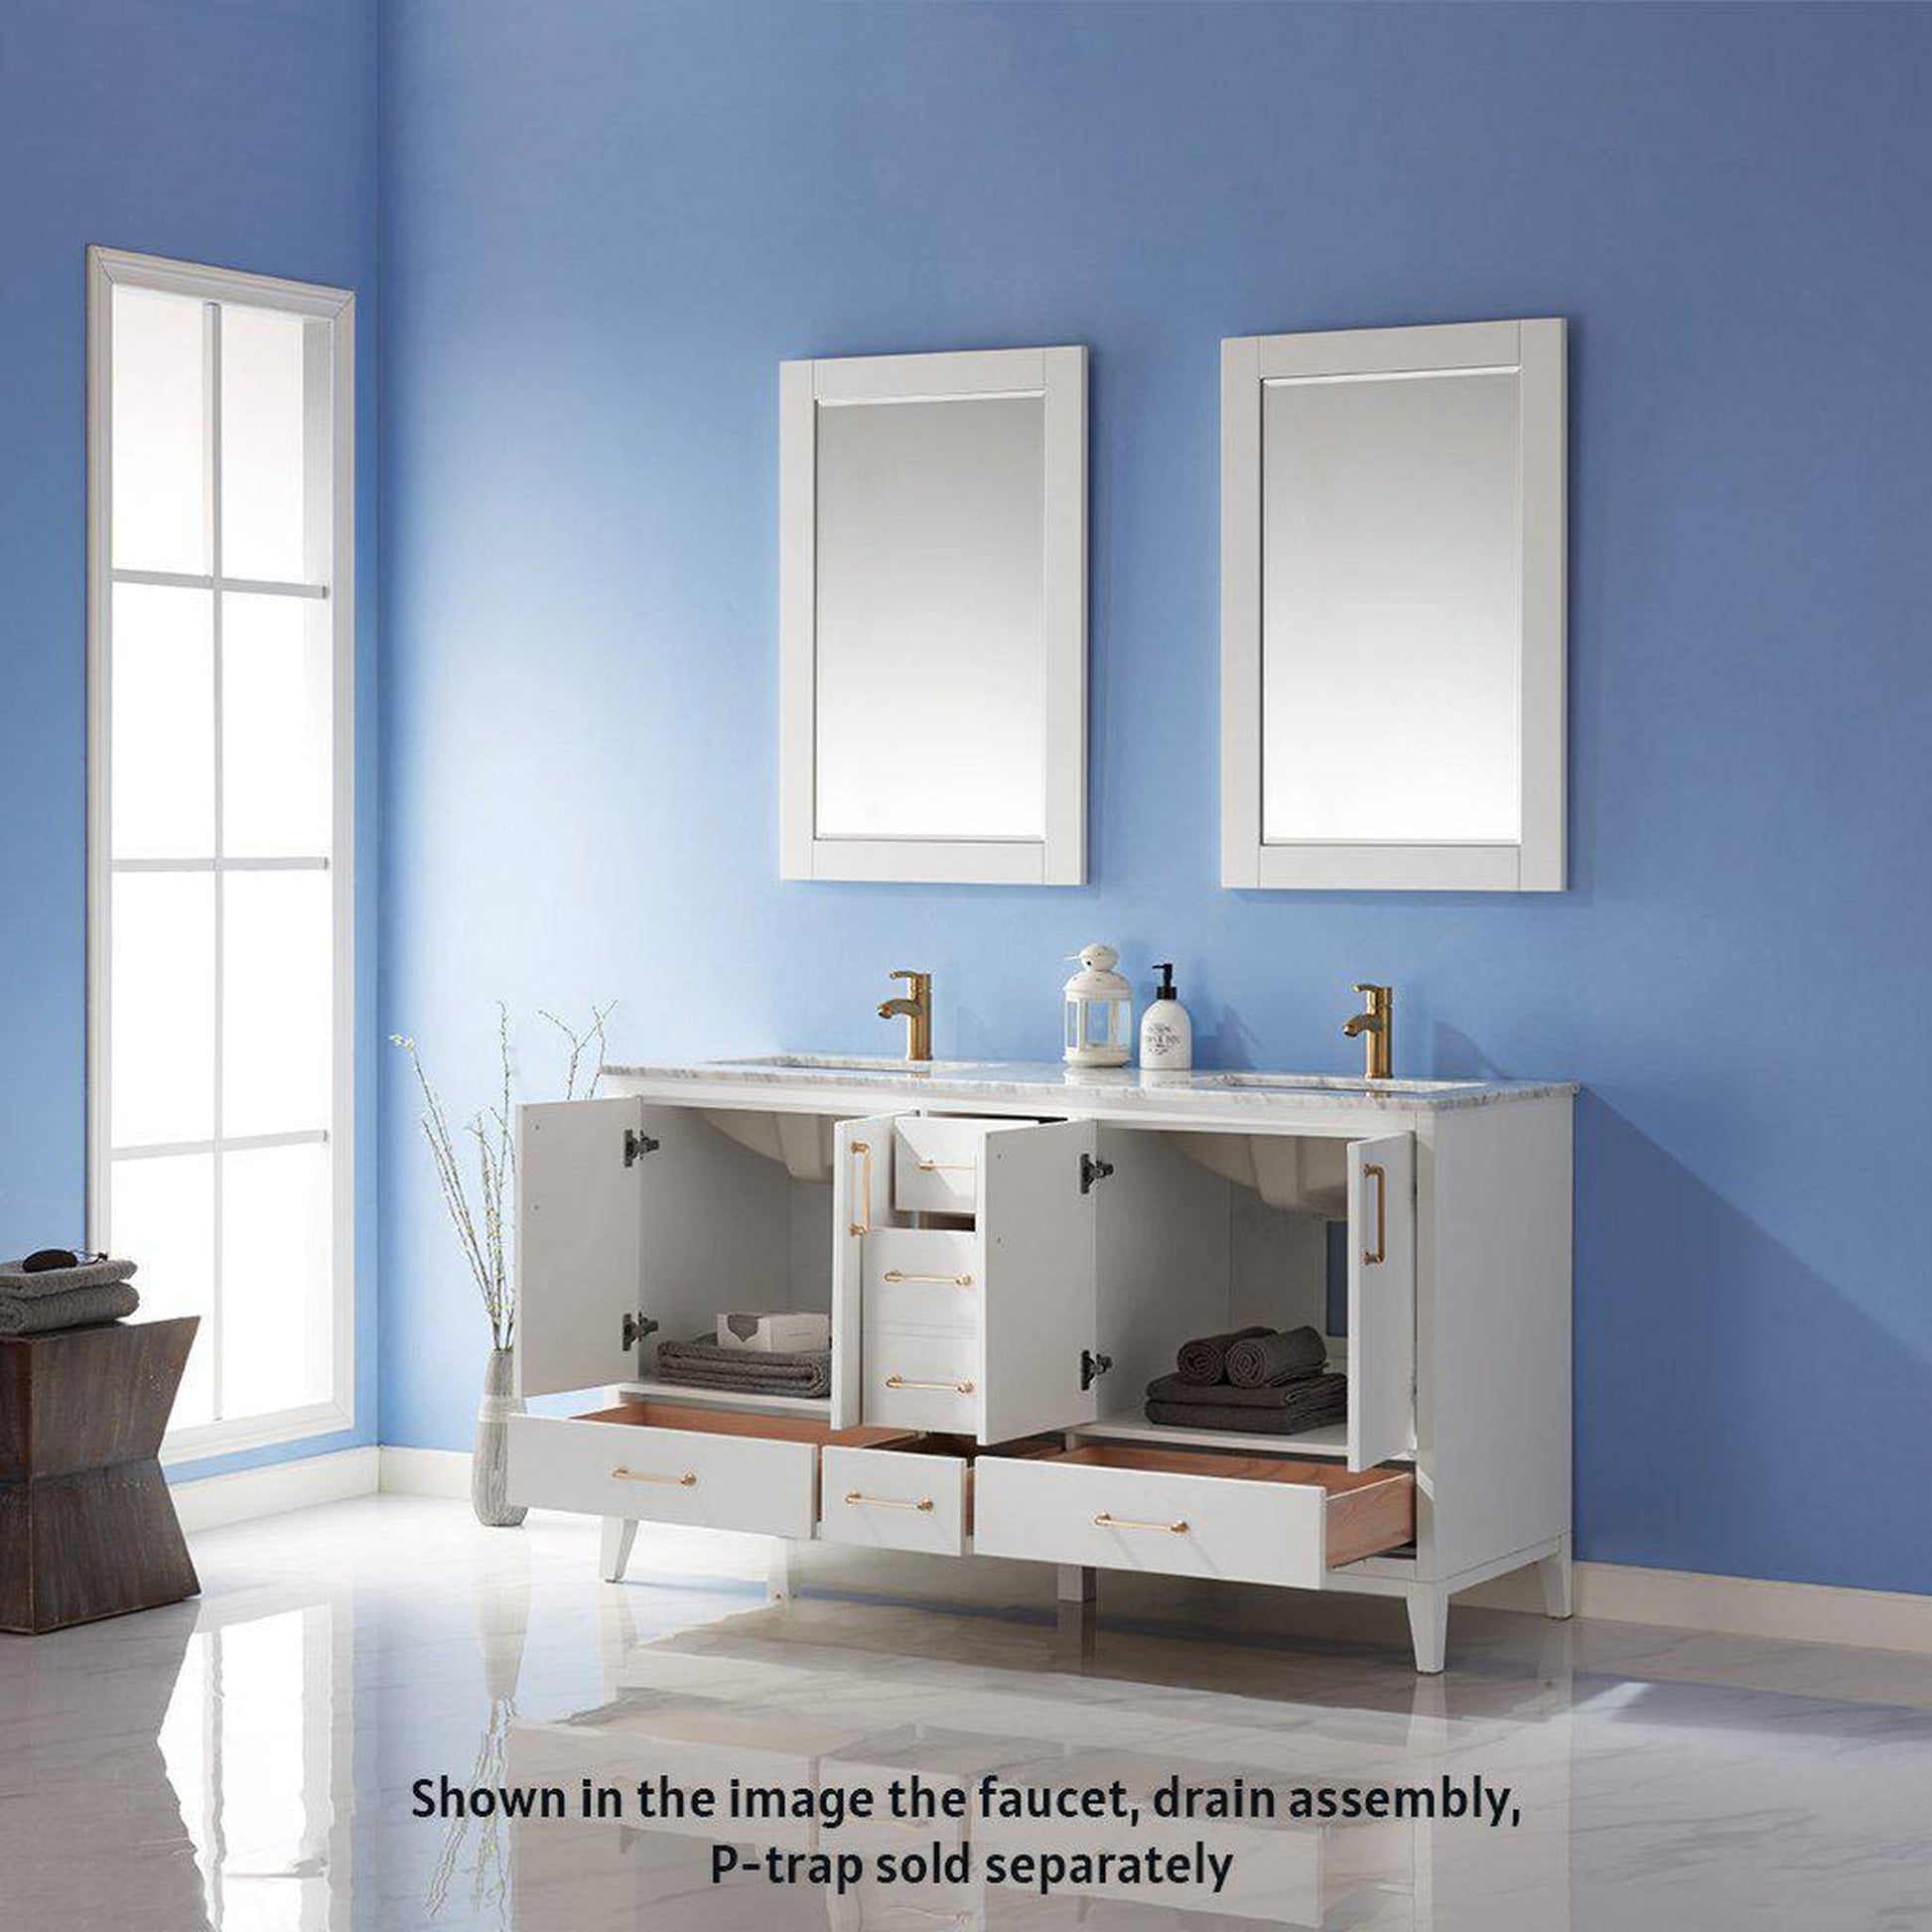 Altair Sutton 60" Double White Freestanding Bathroom Vanity Set With Mirror, Natural Carrara White Marble Two Rectangular Undermount Ceramic Sinks, and Overflow